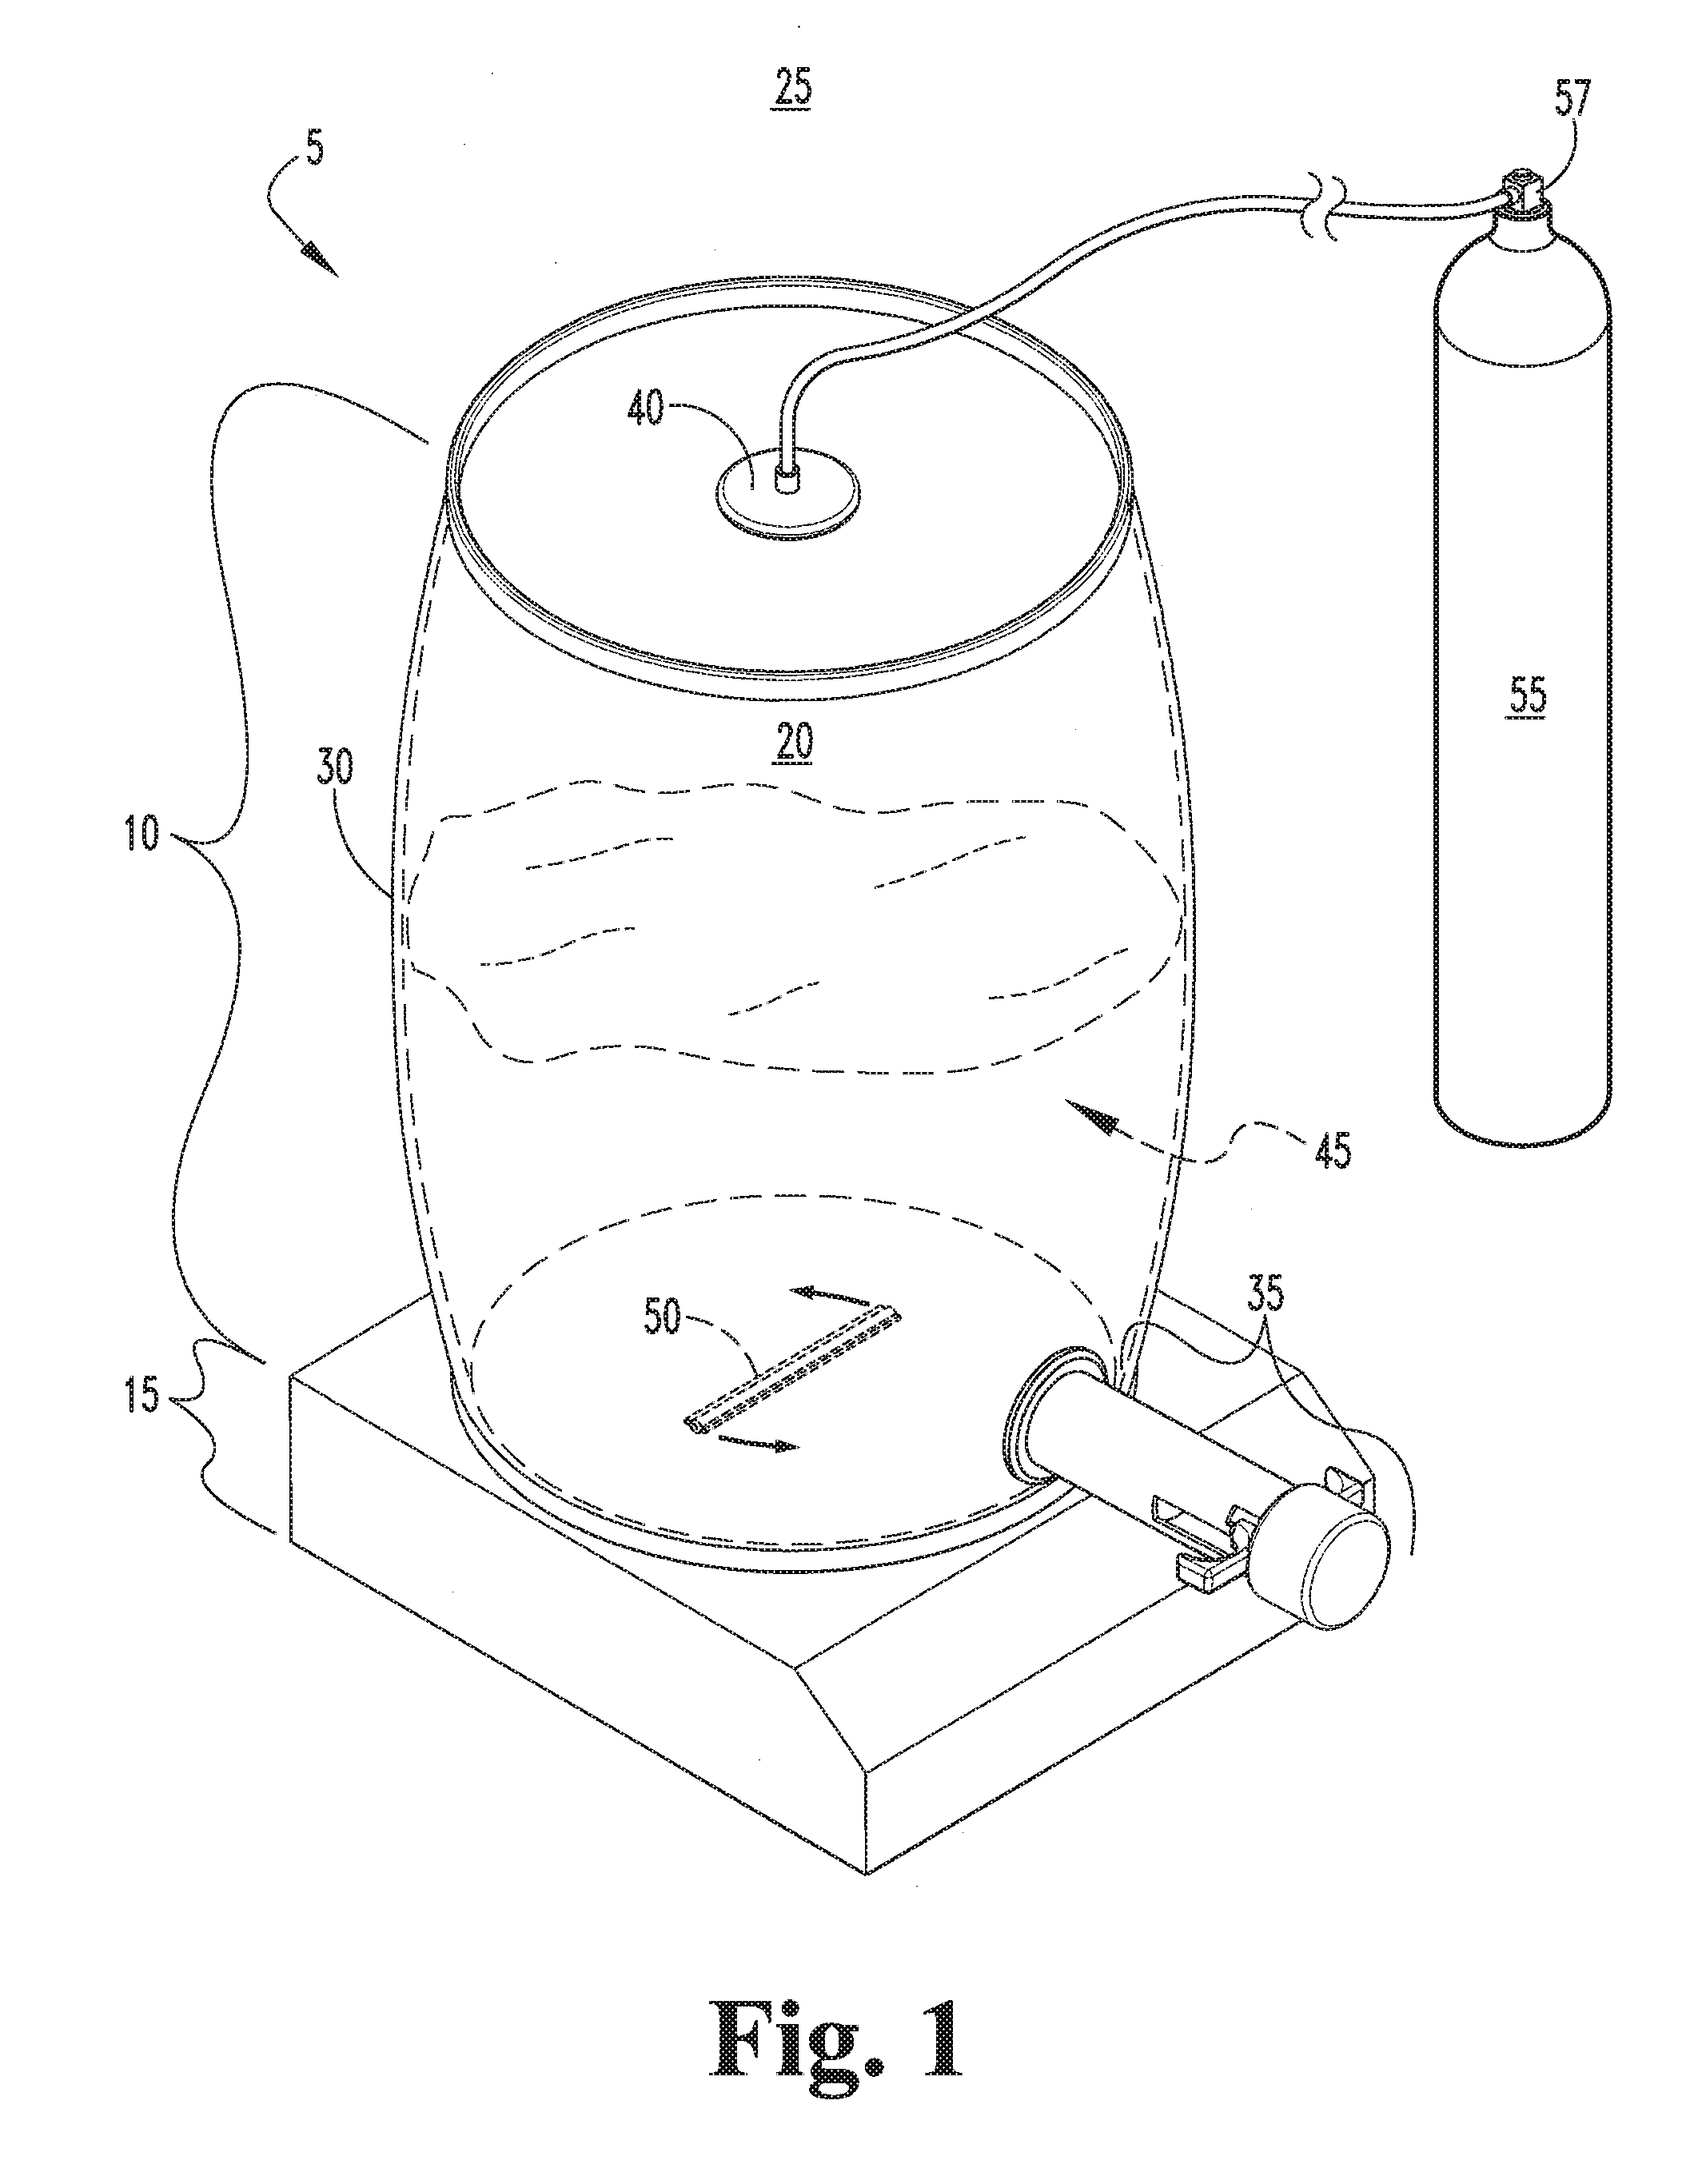 Systems and methods for distributing and dispensing chocolate